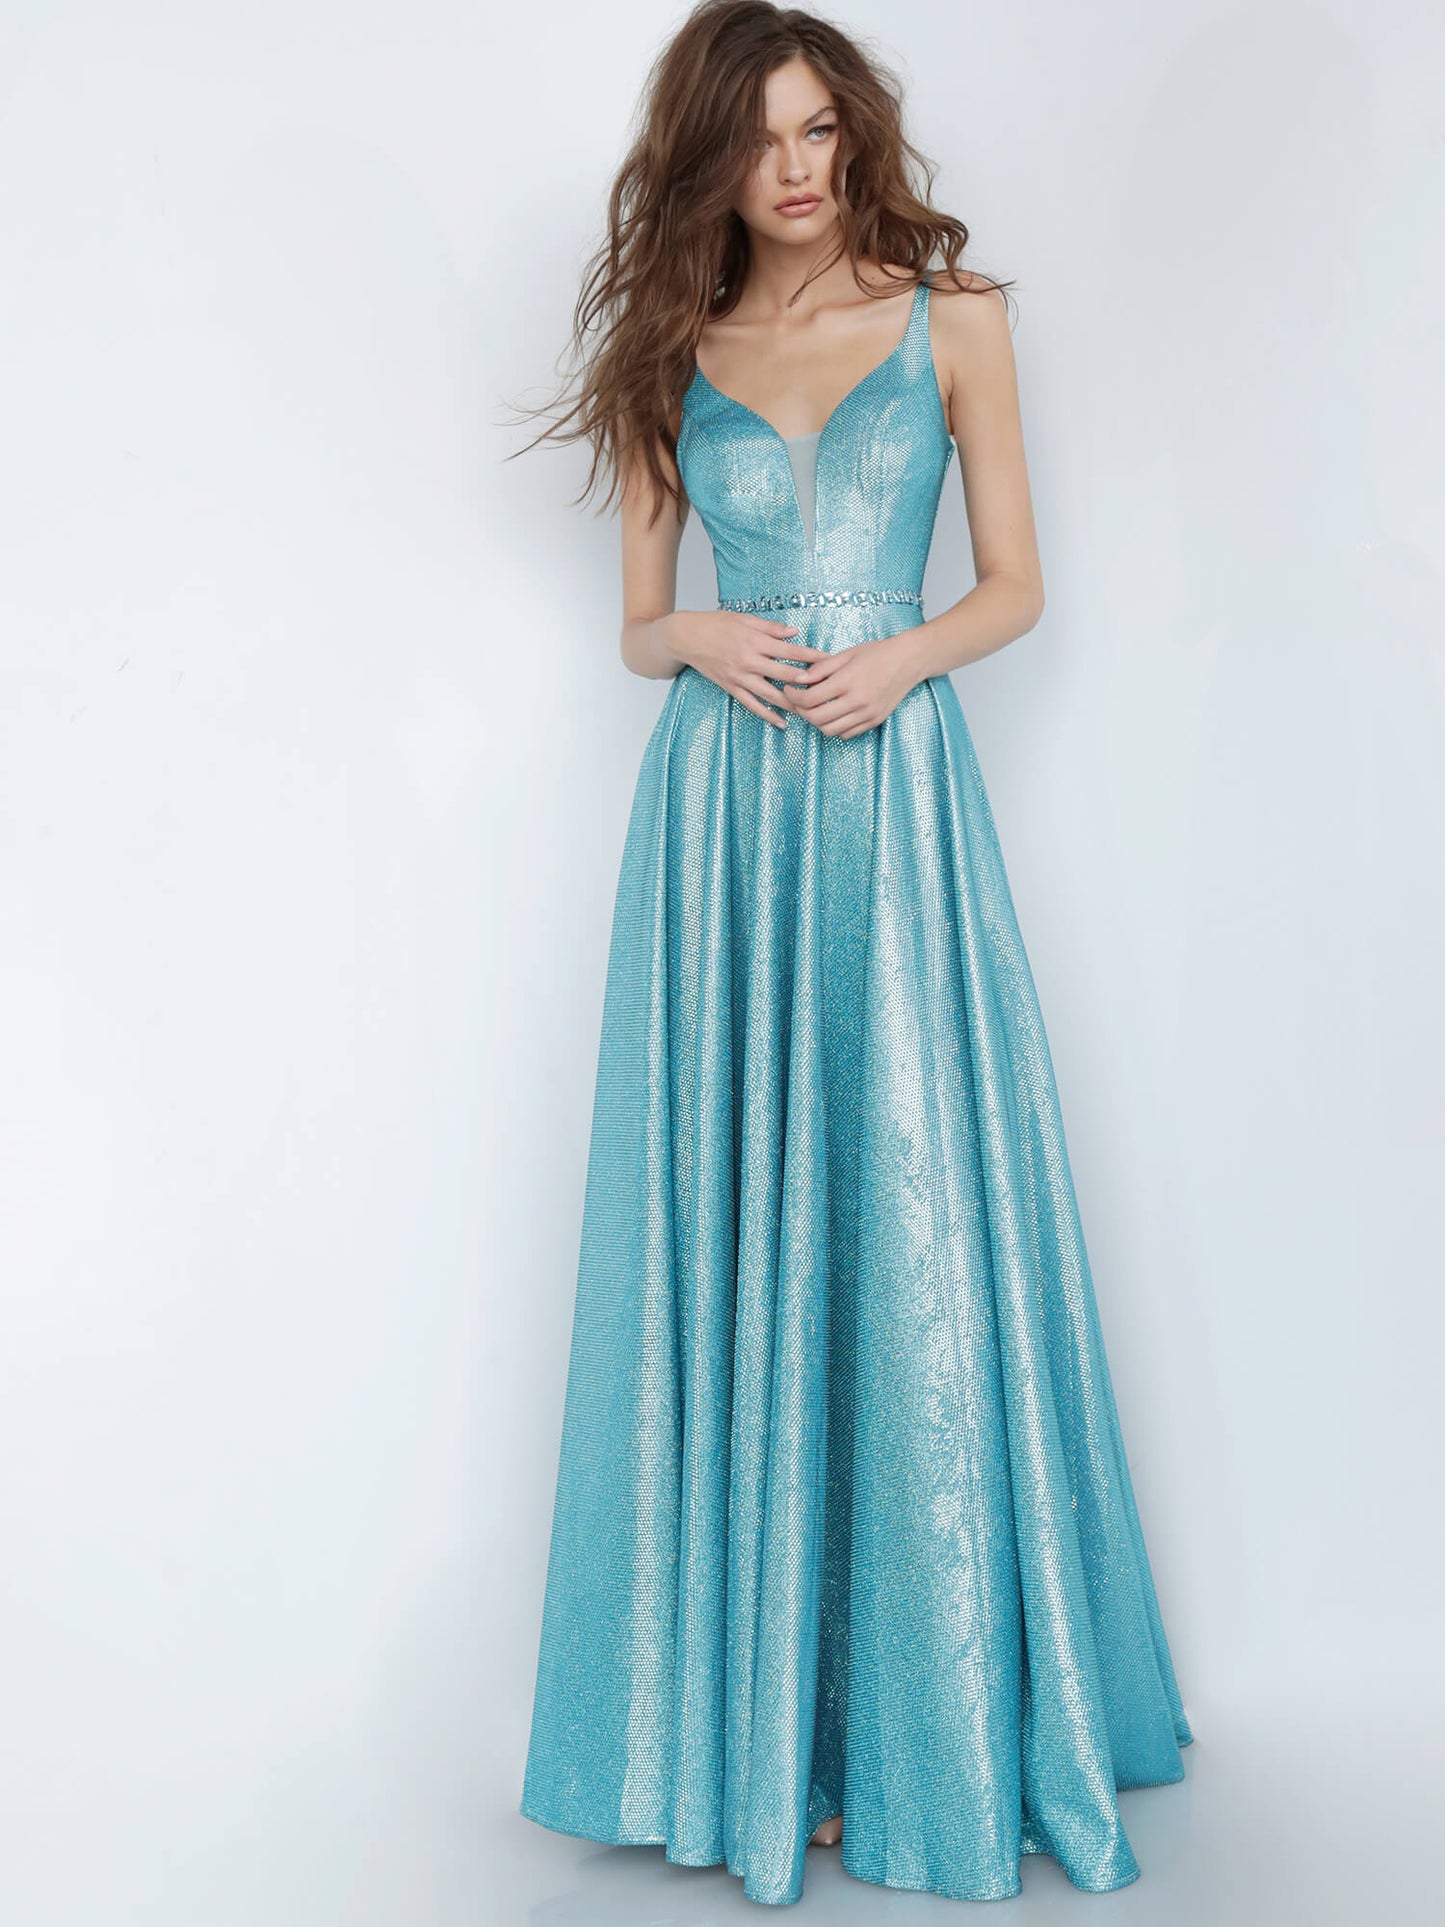 JVN67050 peacock metallic prom dress with a plunging mesh insert neckline, sleeveless fitted bodice, and v-back, embellished waist belt and floor-length pleated flowy skirt evening gown pageant dress.